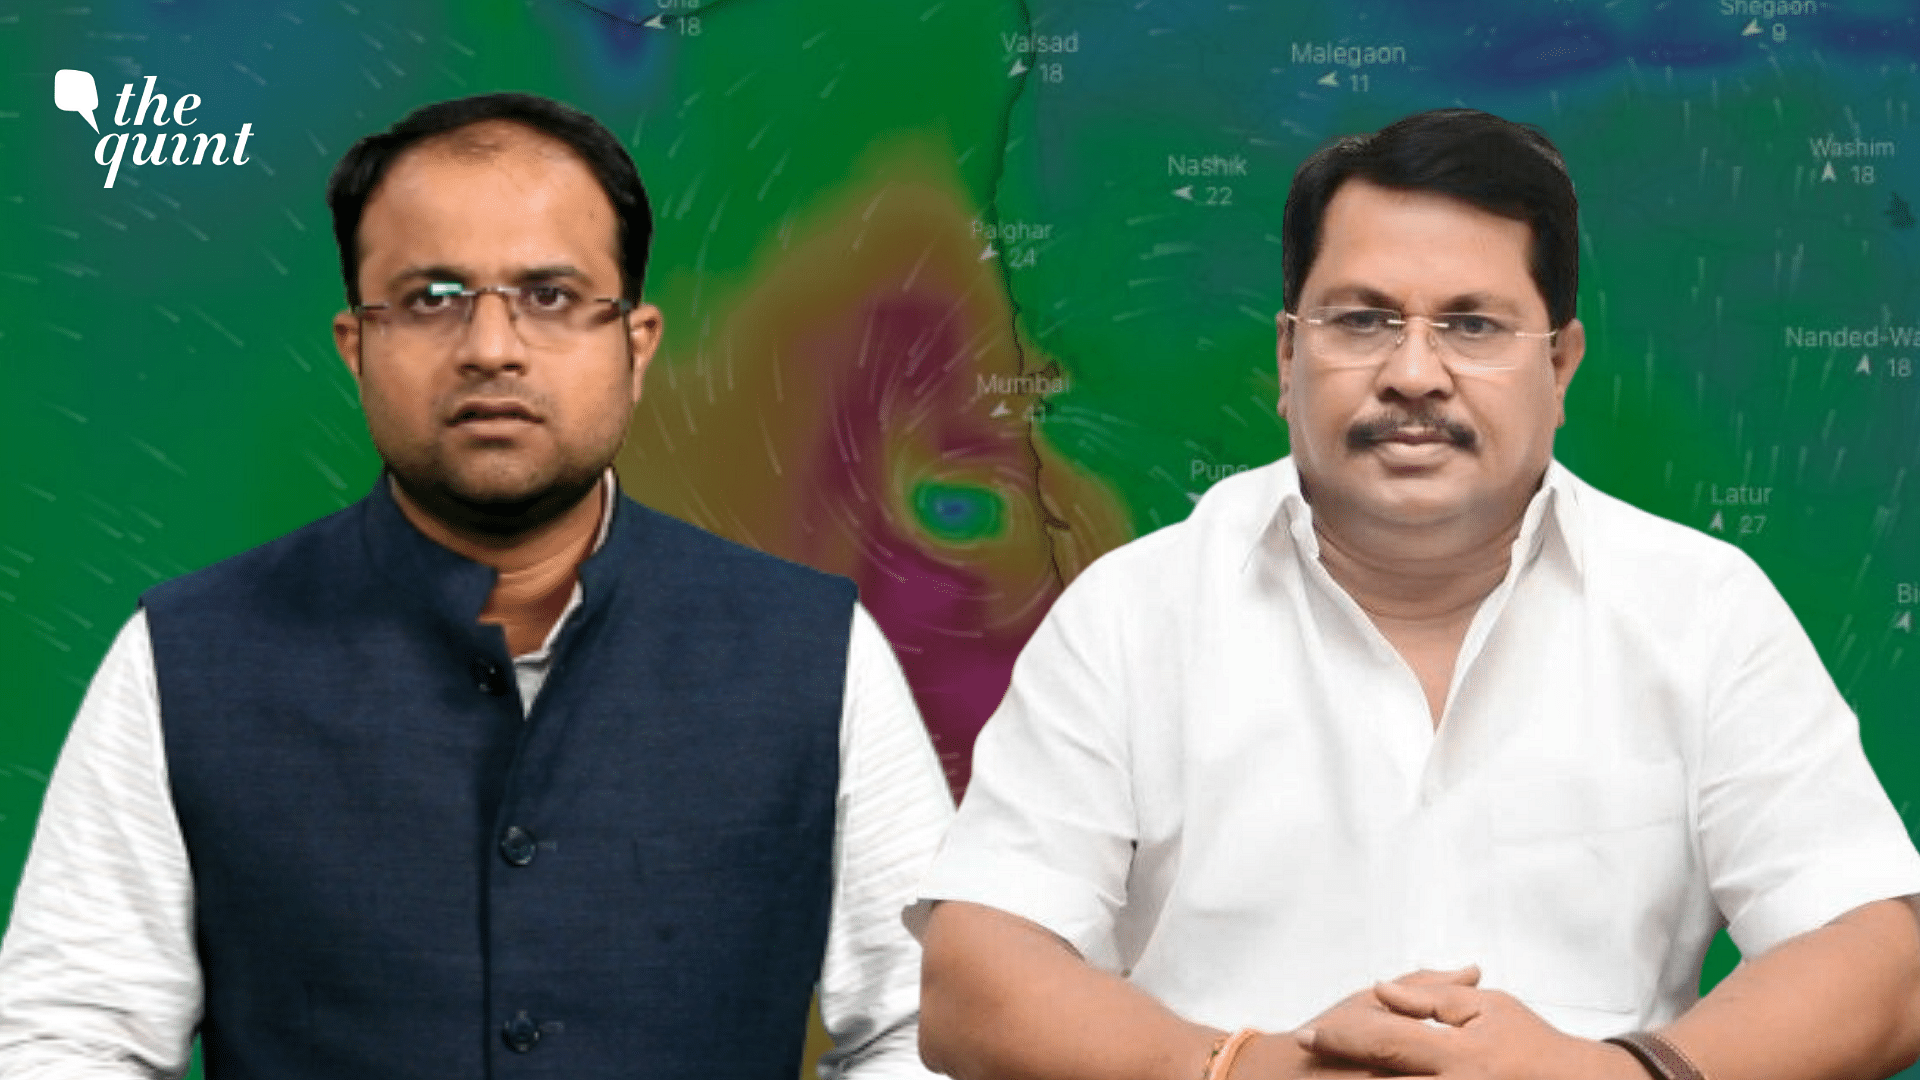 Maharashtra Braces for Cyclone Nisarga: What Steps Has the State Taken?